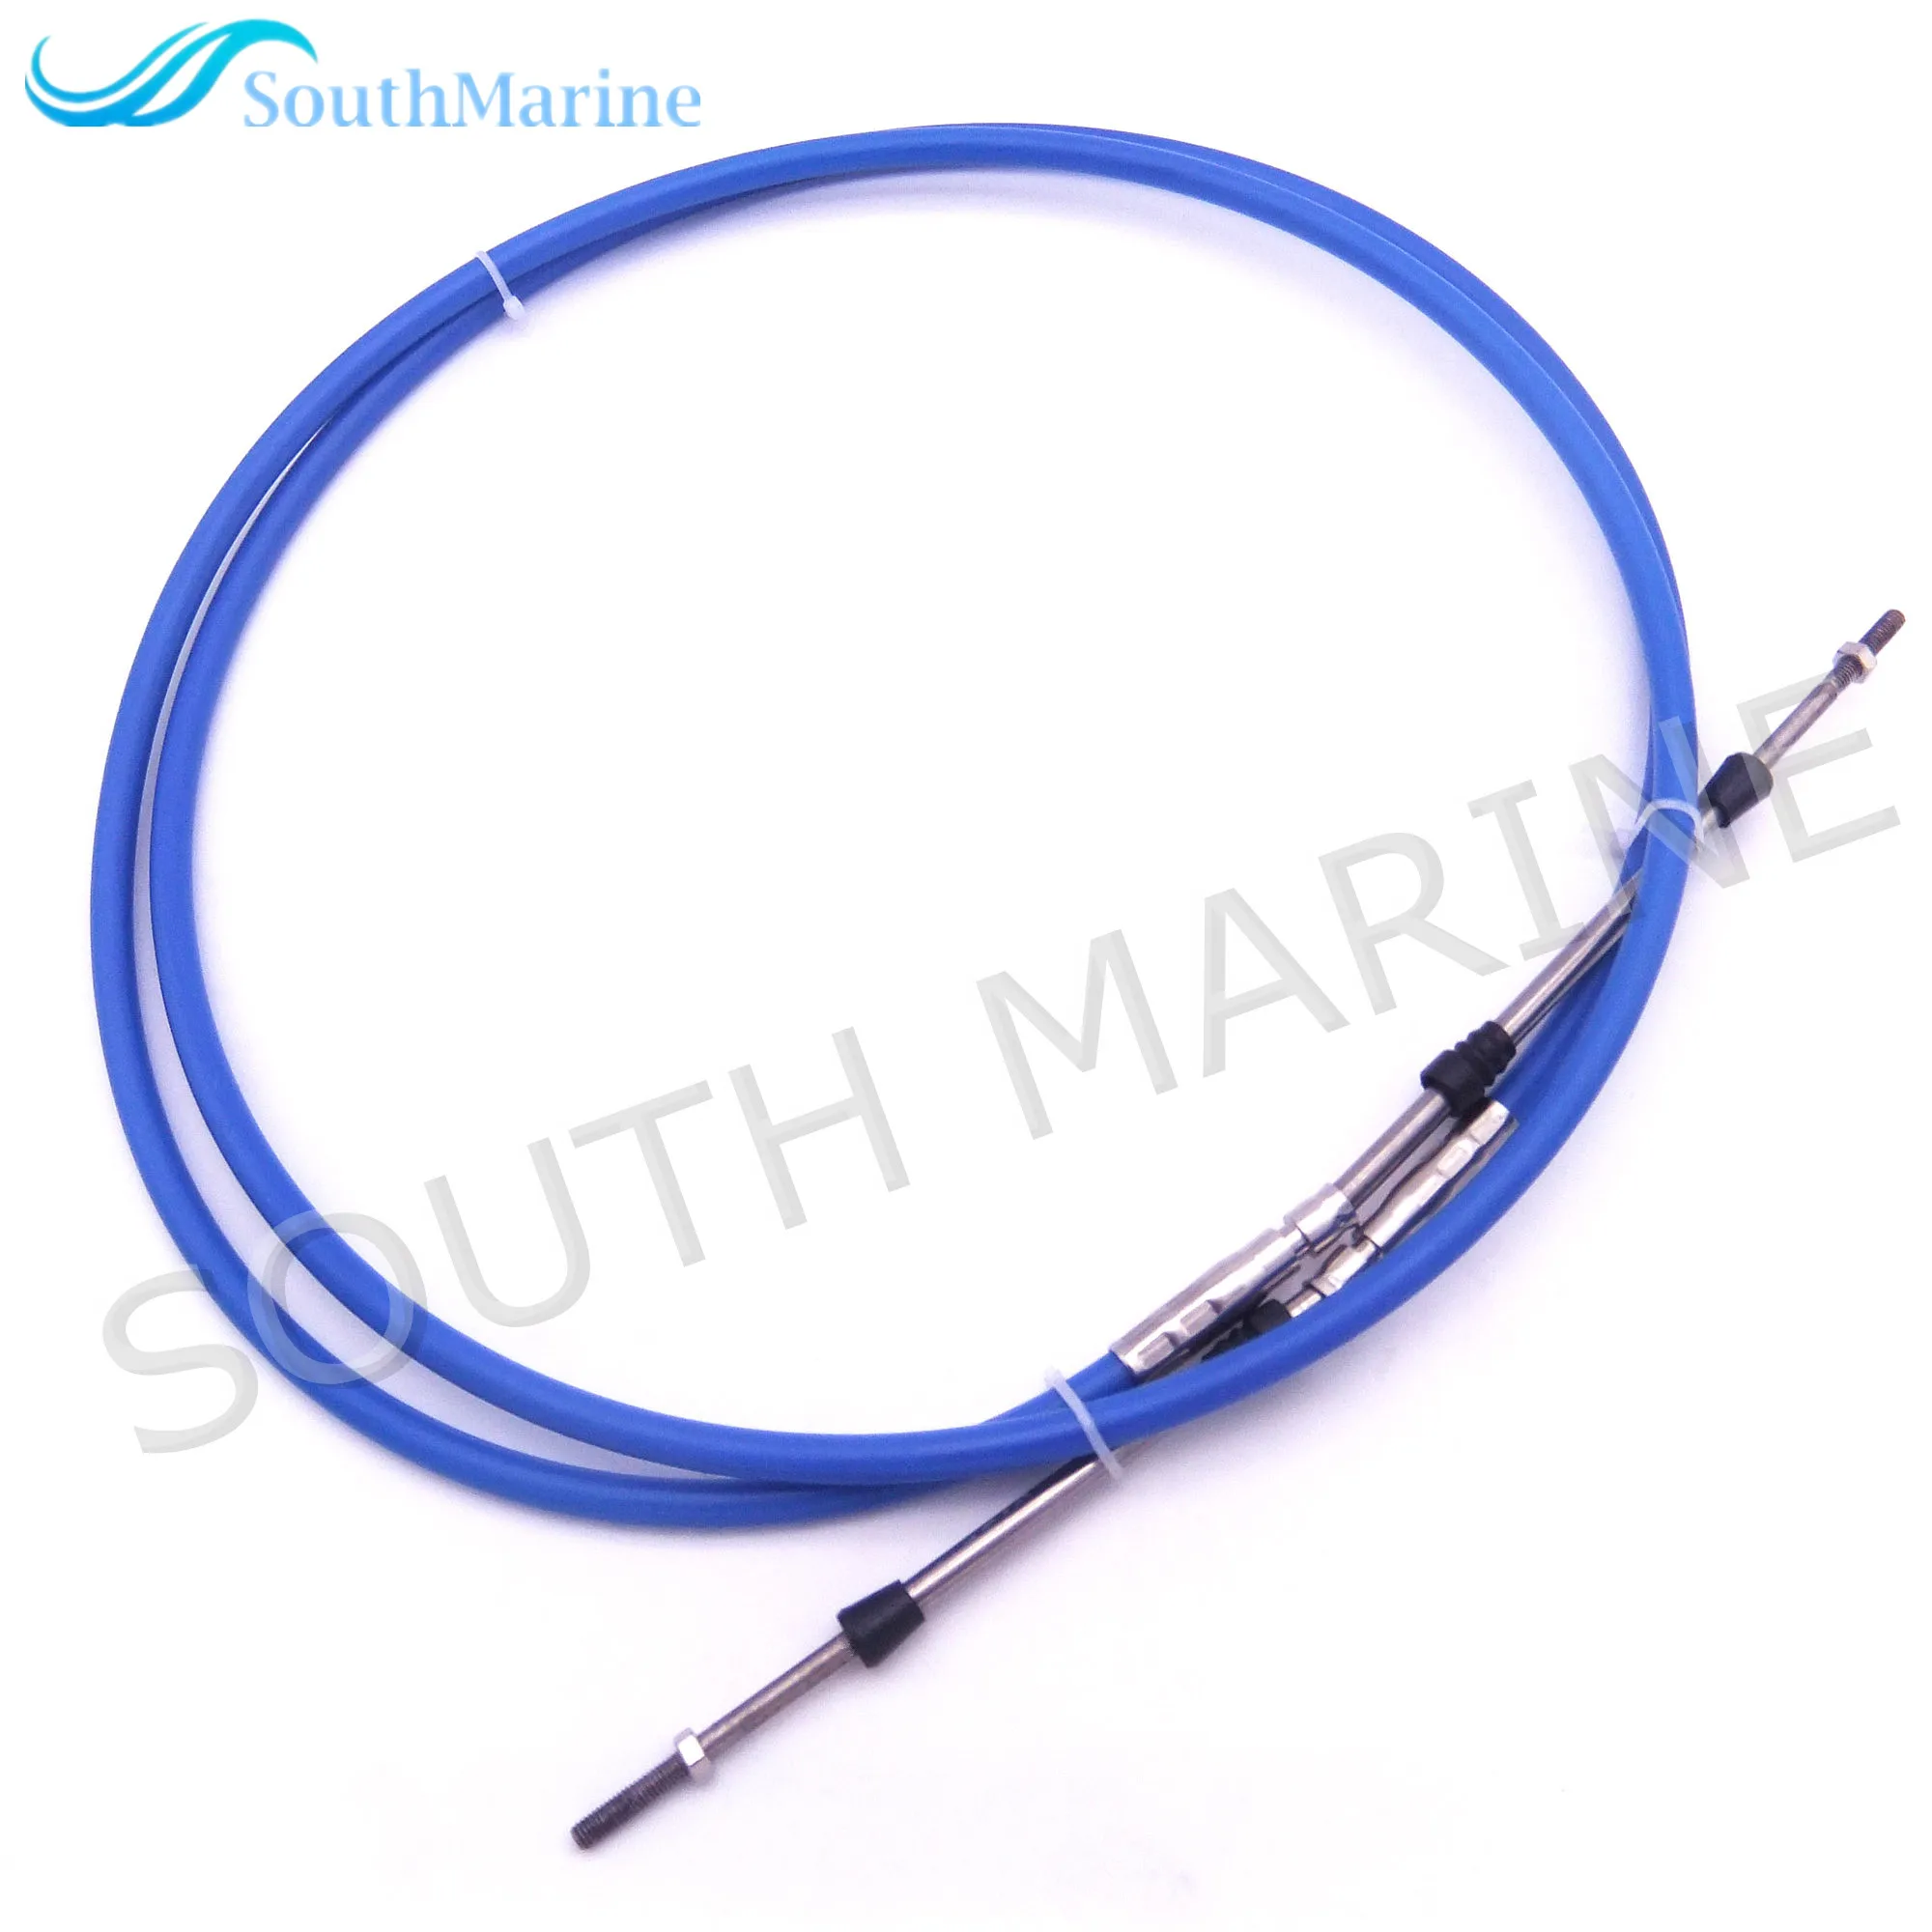 

Outboard Engine Remote Control Throttle Shift Cable 8ft ABA-CABLE-08-GY for Yamaha Boat Motor Steering System 2.438m Blue